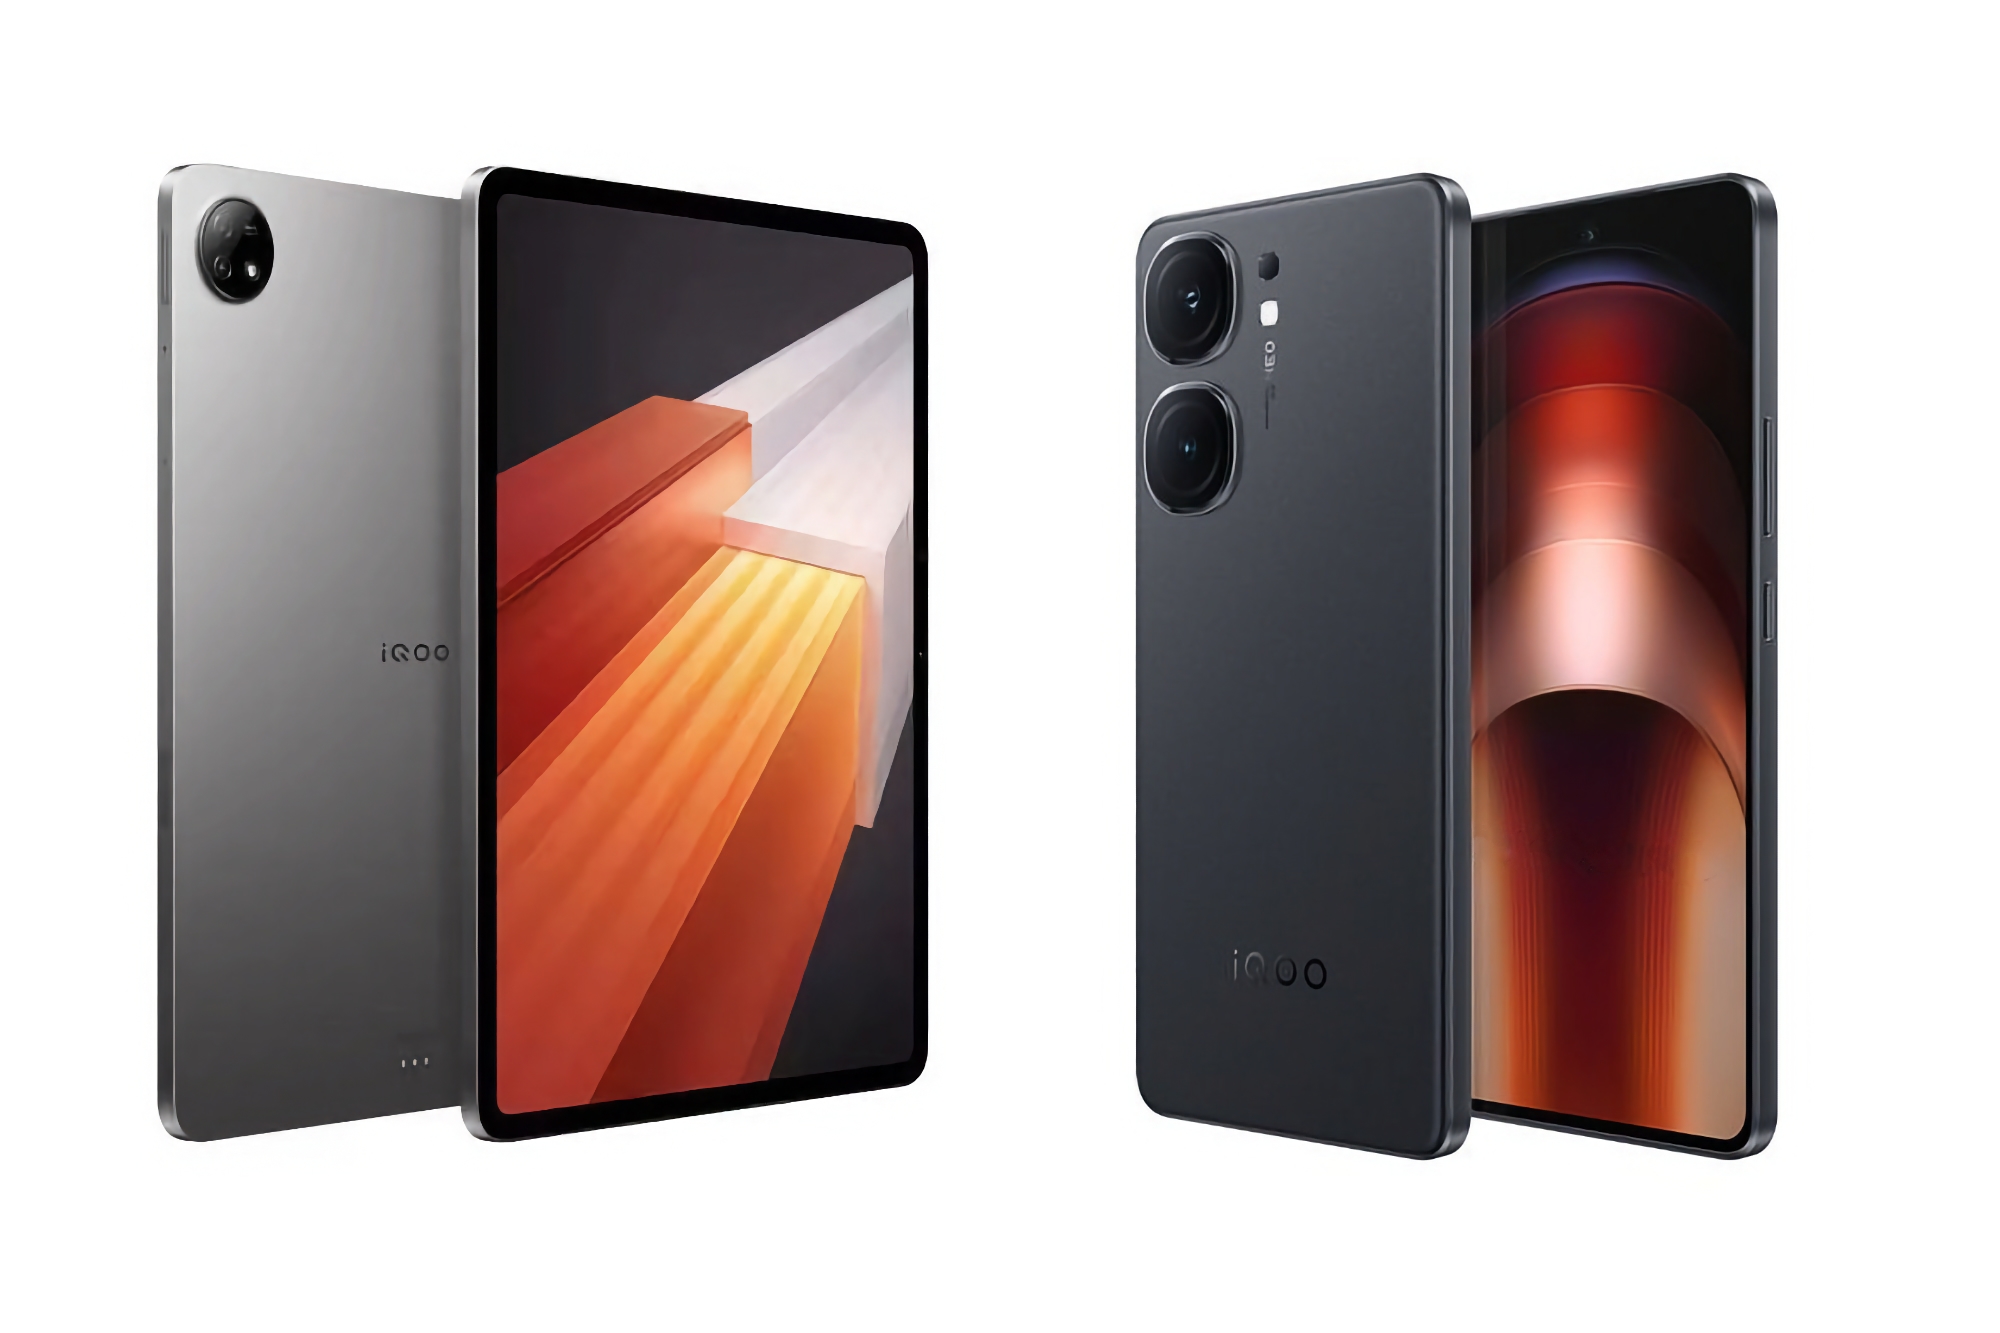 An insider has revealed the detailed specifications of the iQOO Neo 9s Pro smartphone and iQOO Pad 2 Pro tablet